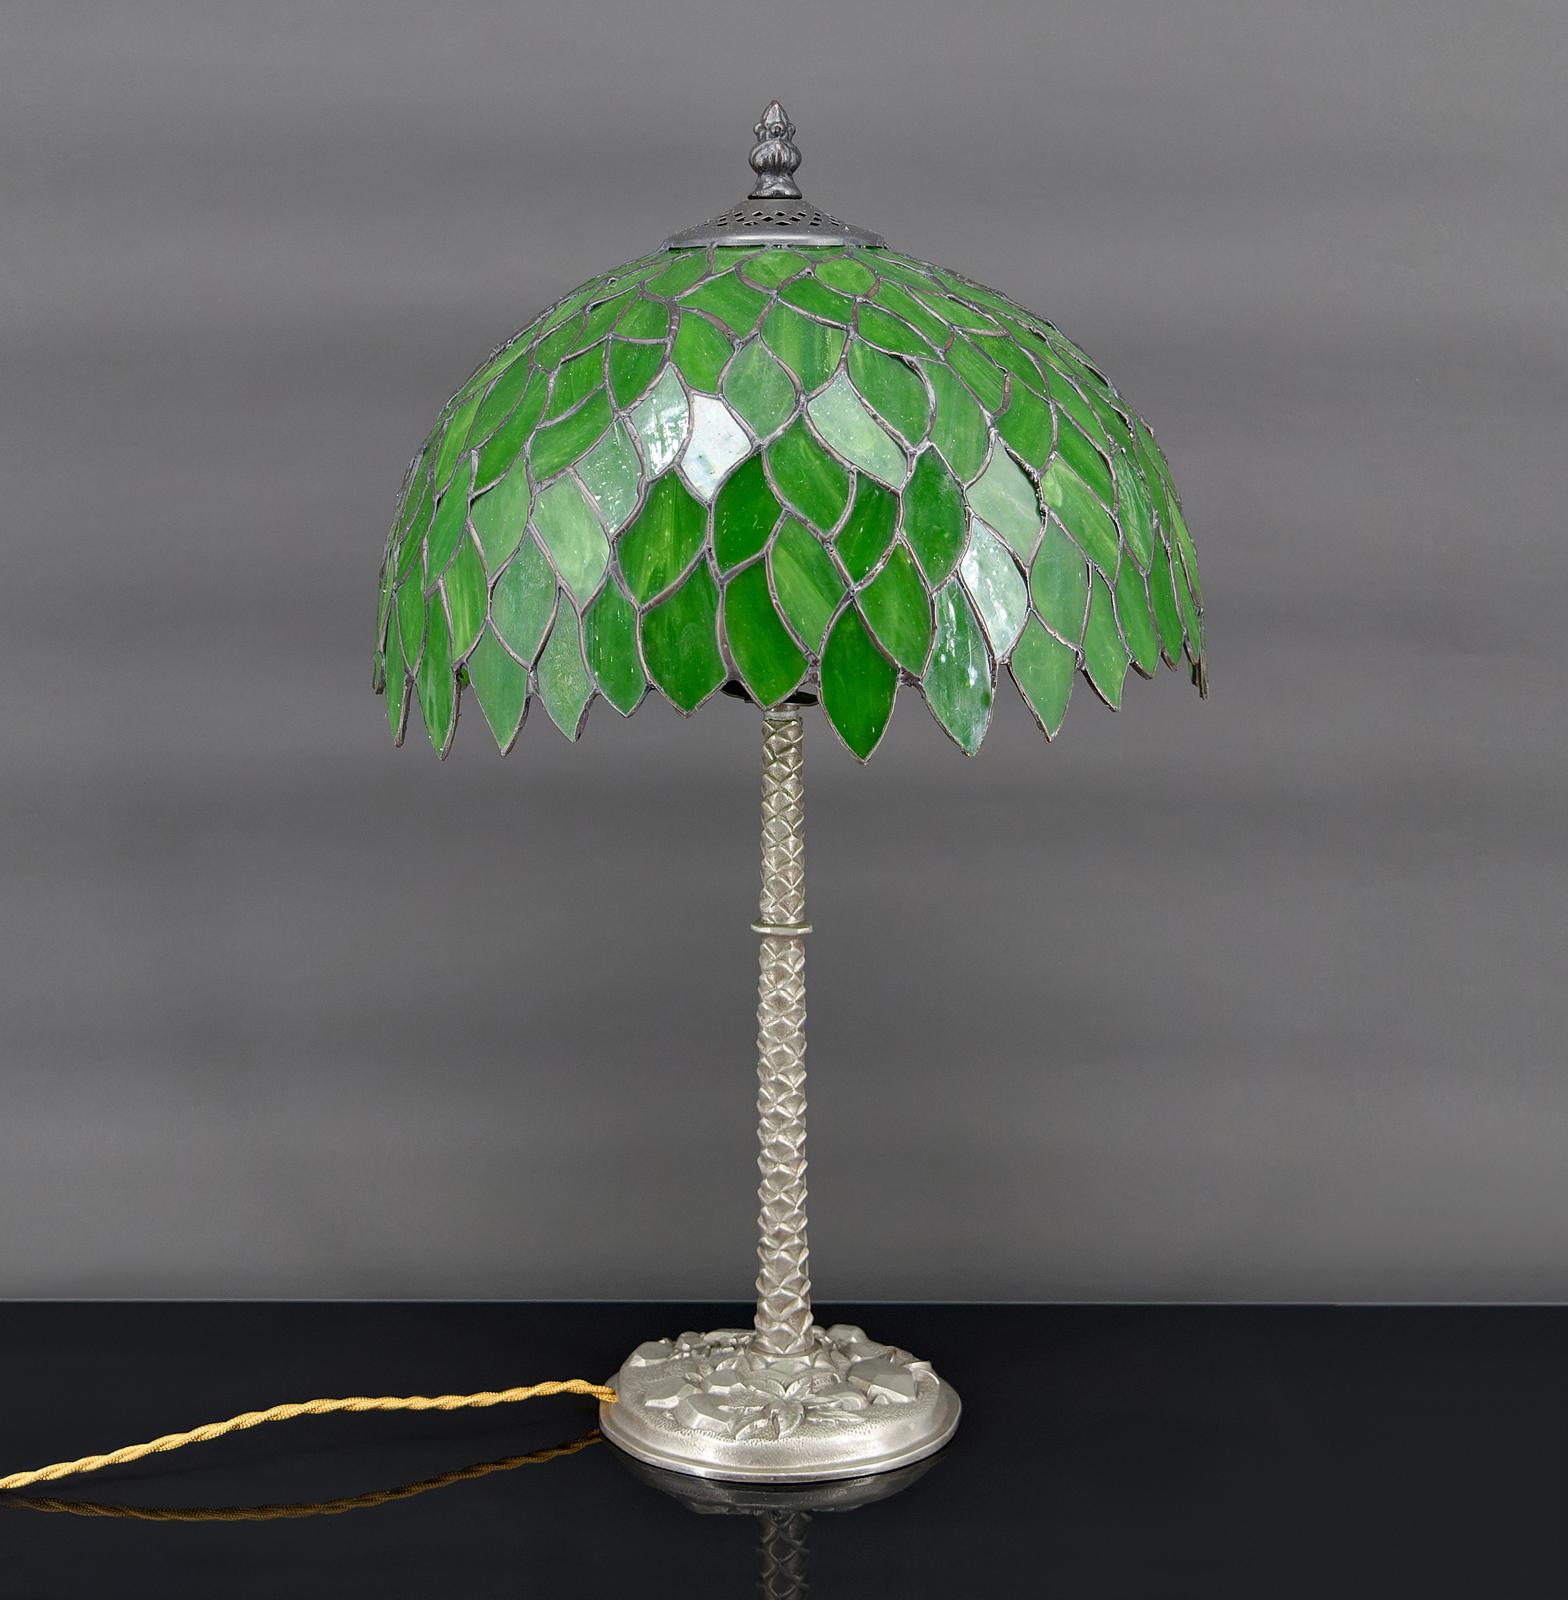 
Superb tree/palm lamp, silvered bronze base. Green stained glass lampshade

Art Nouveau, France, Circa 1900

In excellent condition, new electricity.

Dimensions:
height 50 cm
diameter 32 cm